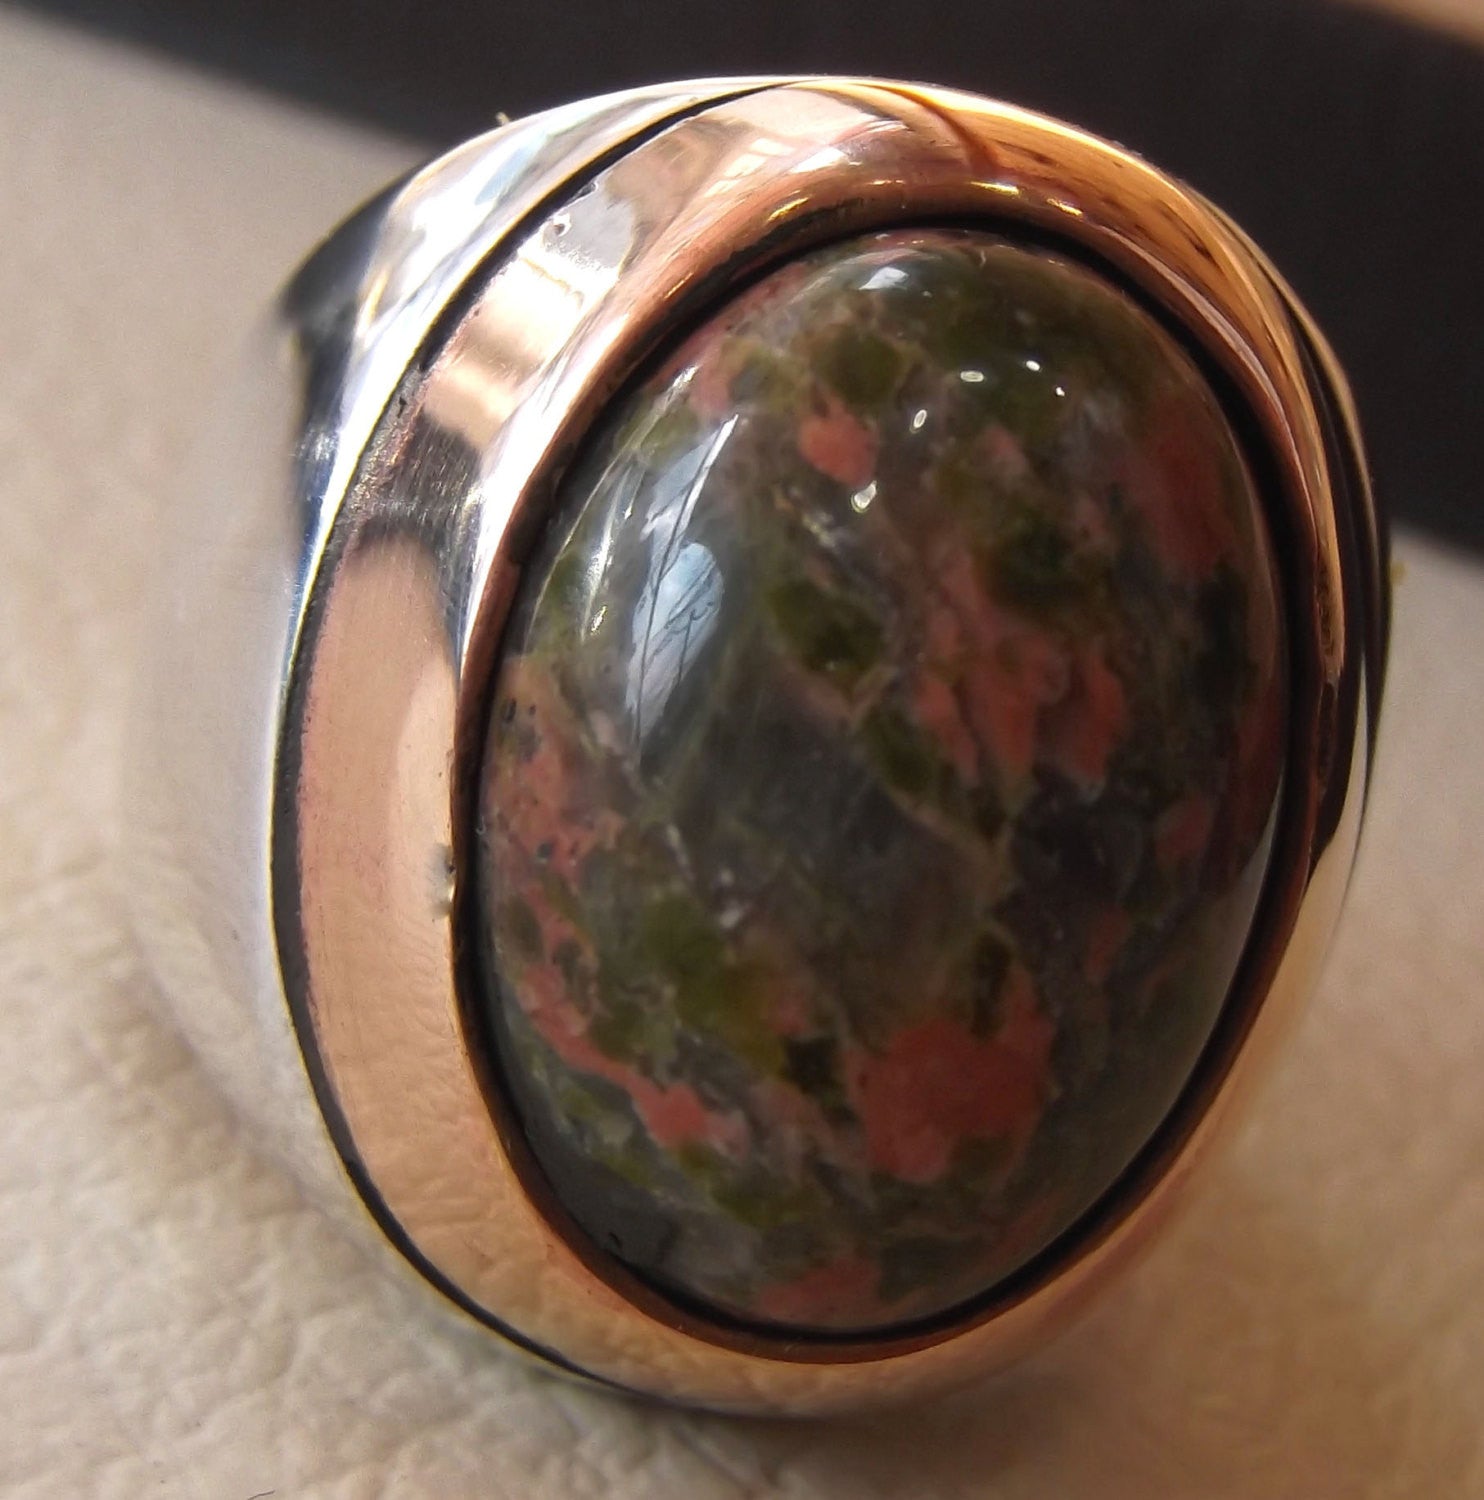 unakaite natural cabochon men huge ring sterling silver 925 with bronze frame semi precious oval green rose unakite gem jewelry all sizes